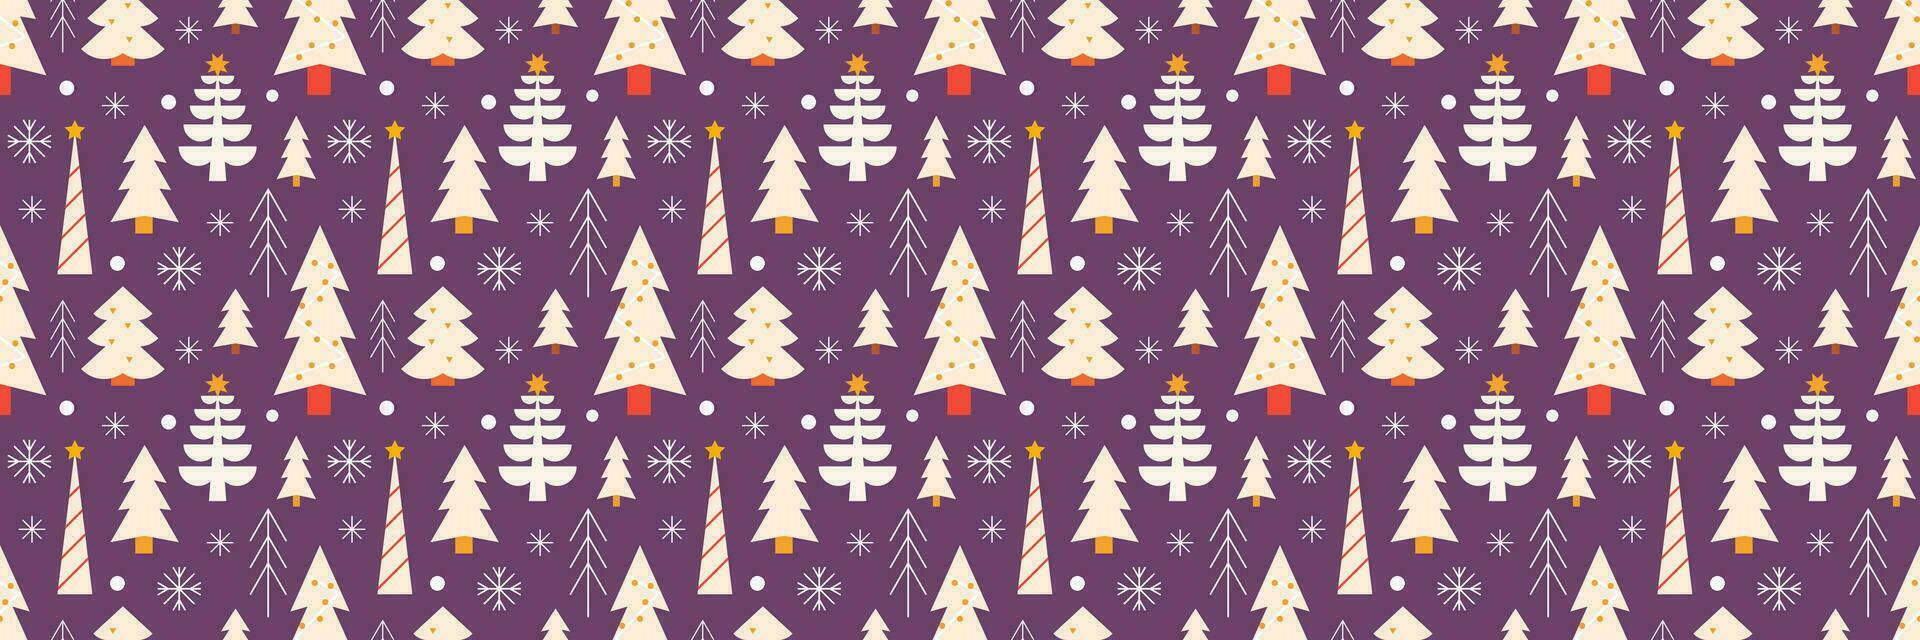 Christmas trees with snowflakes, vector seamless festive pattern